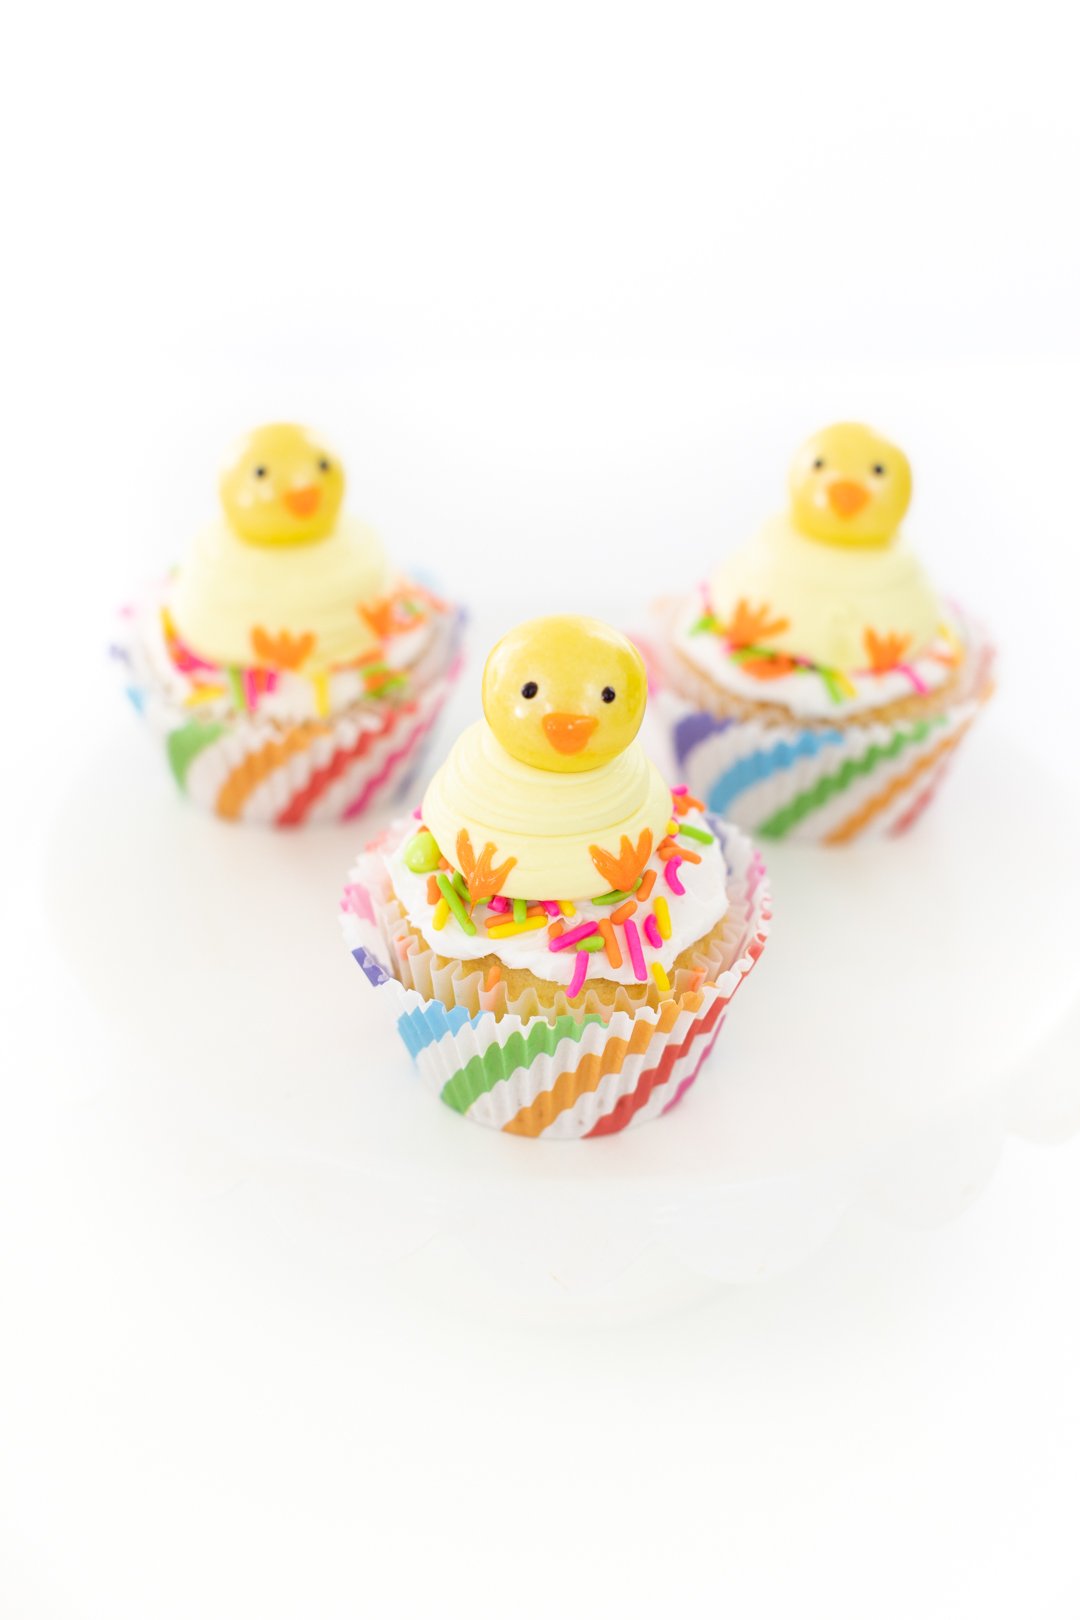 adorable chick cupcakes with gumball heads